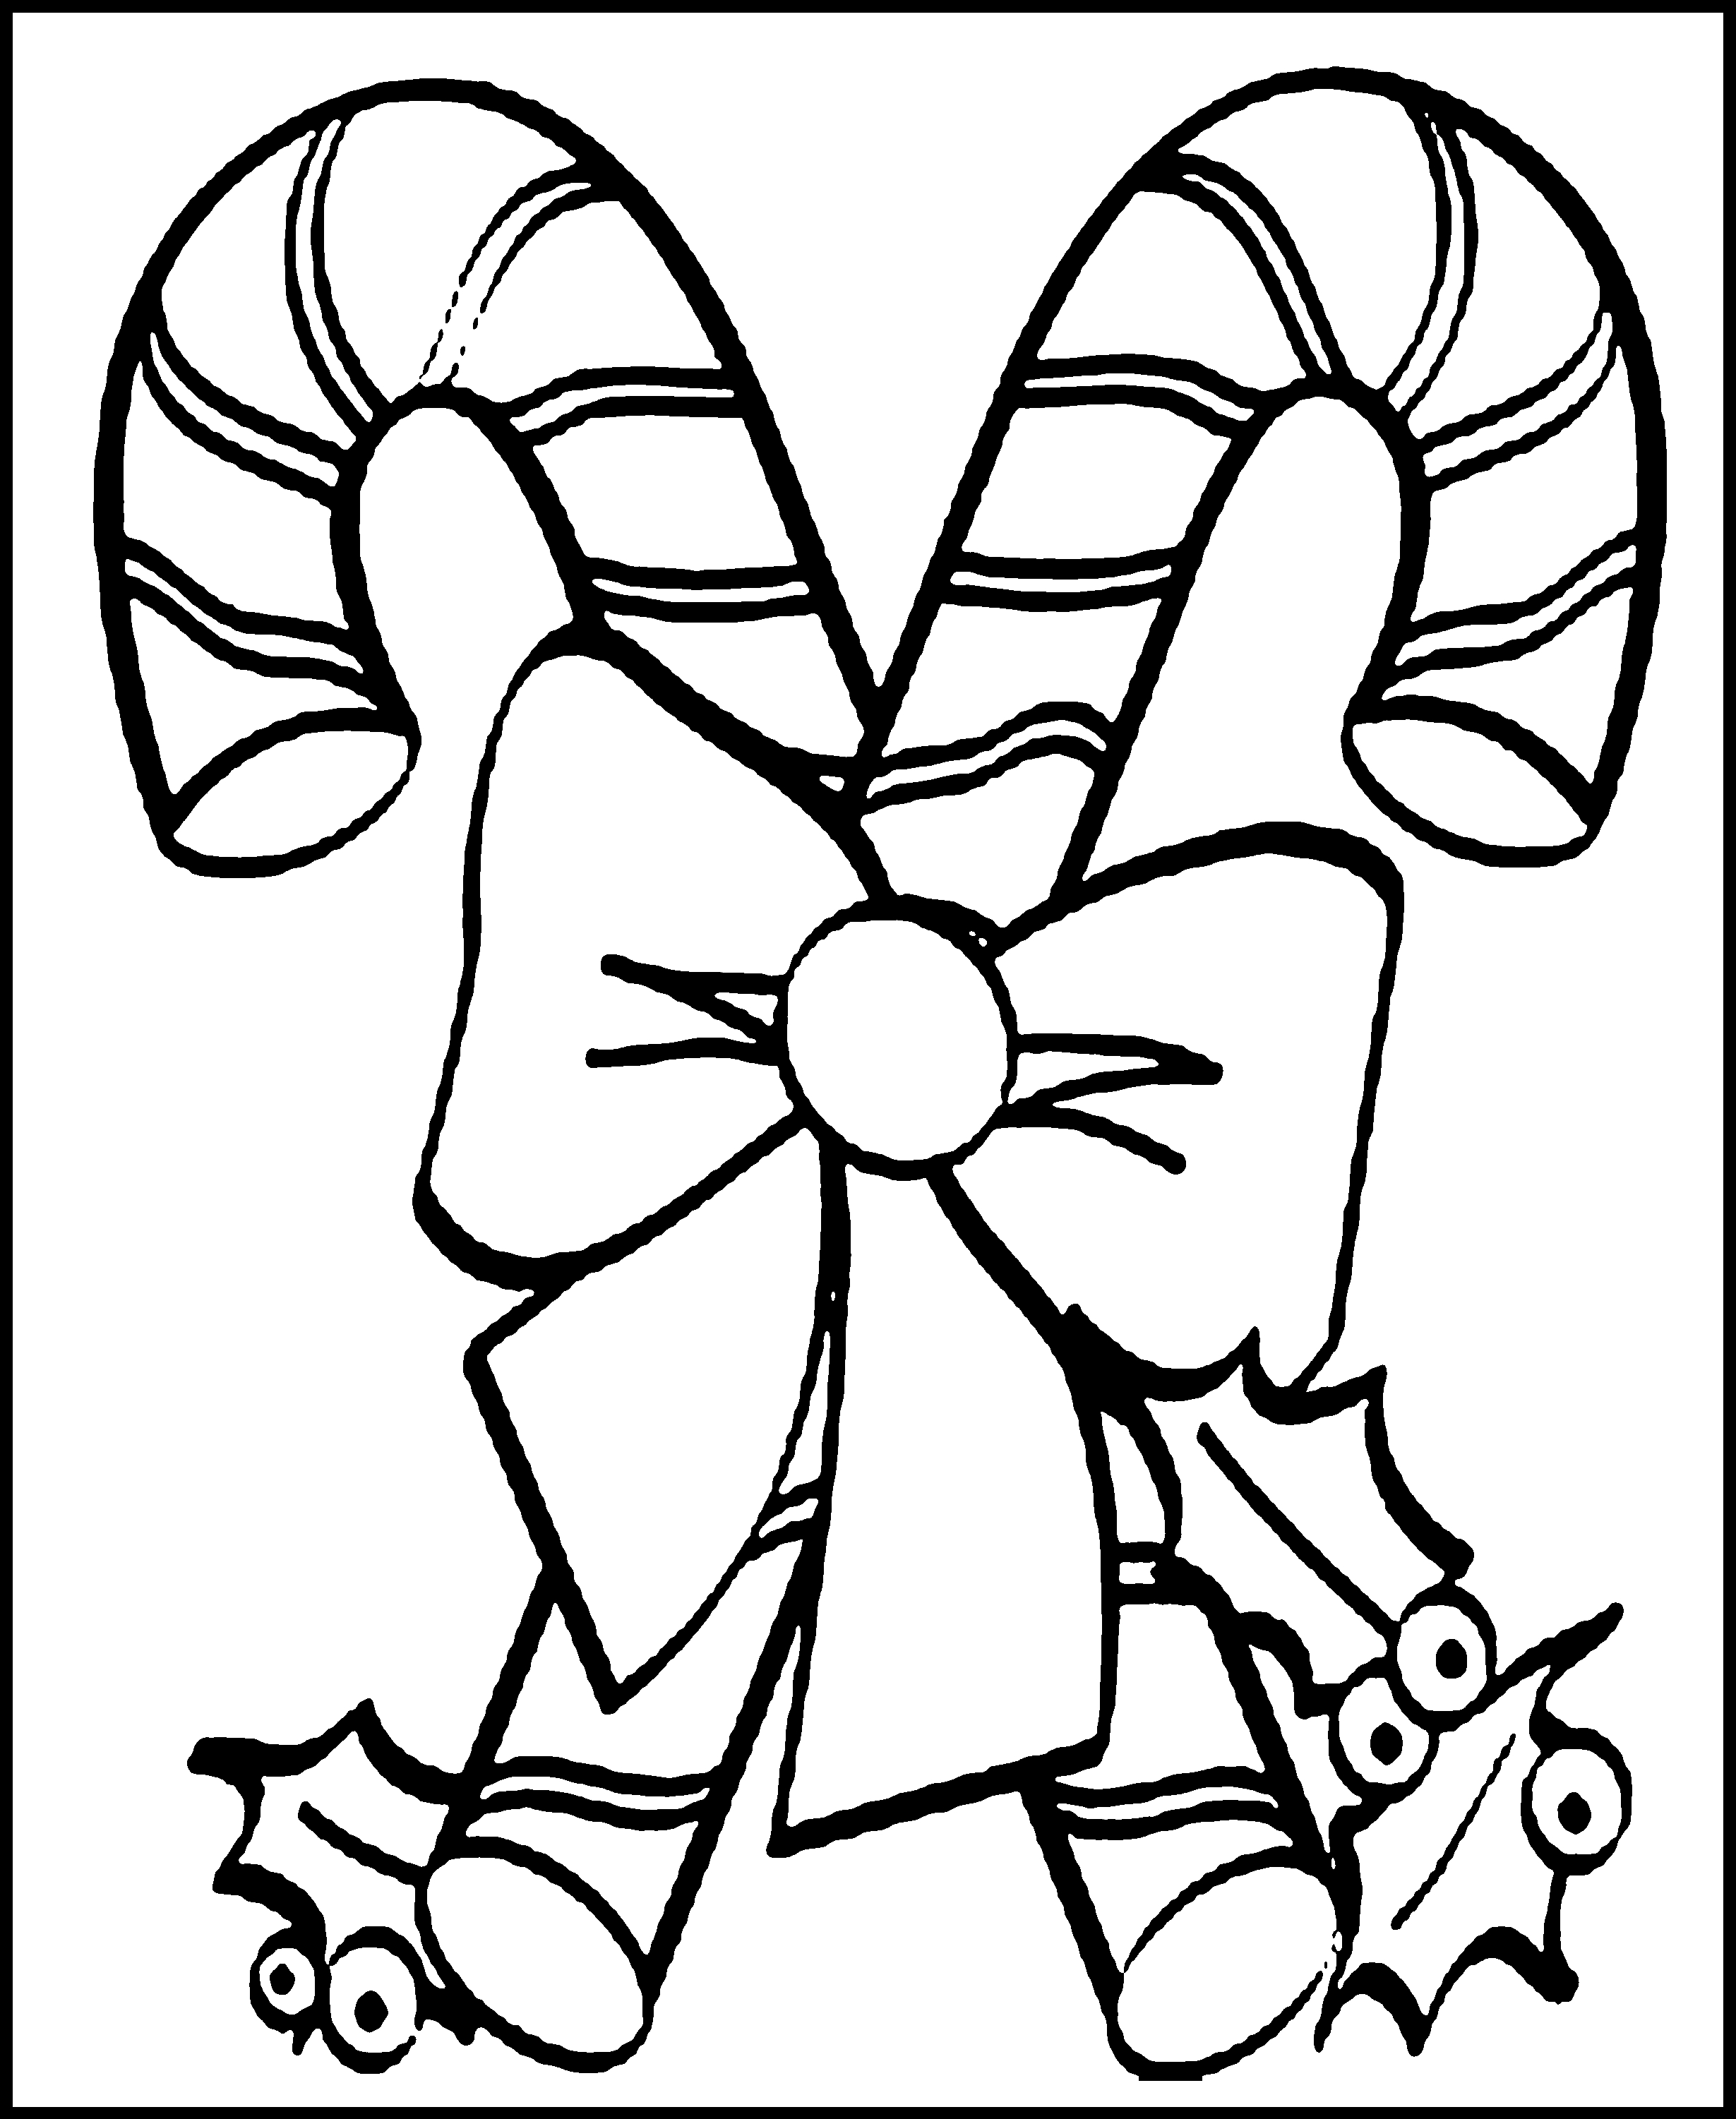 Free Printable Candy Cane Coloring Pages For Kids | Young At Heart - Free Printable Candy Cane